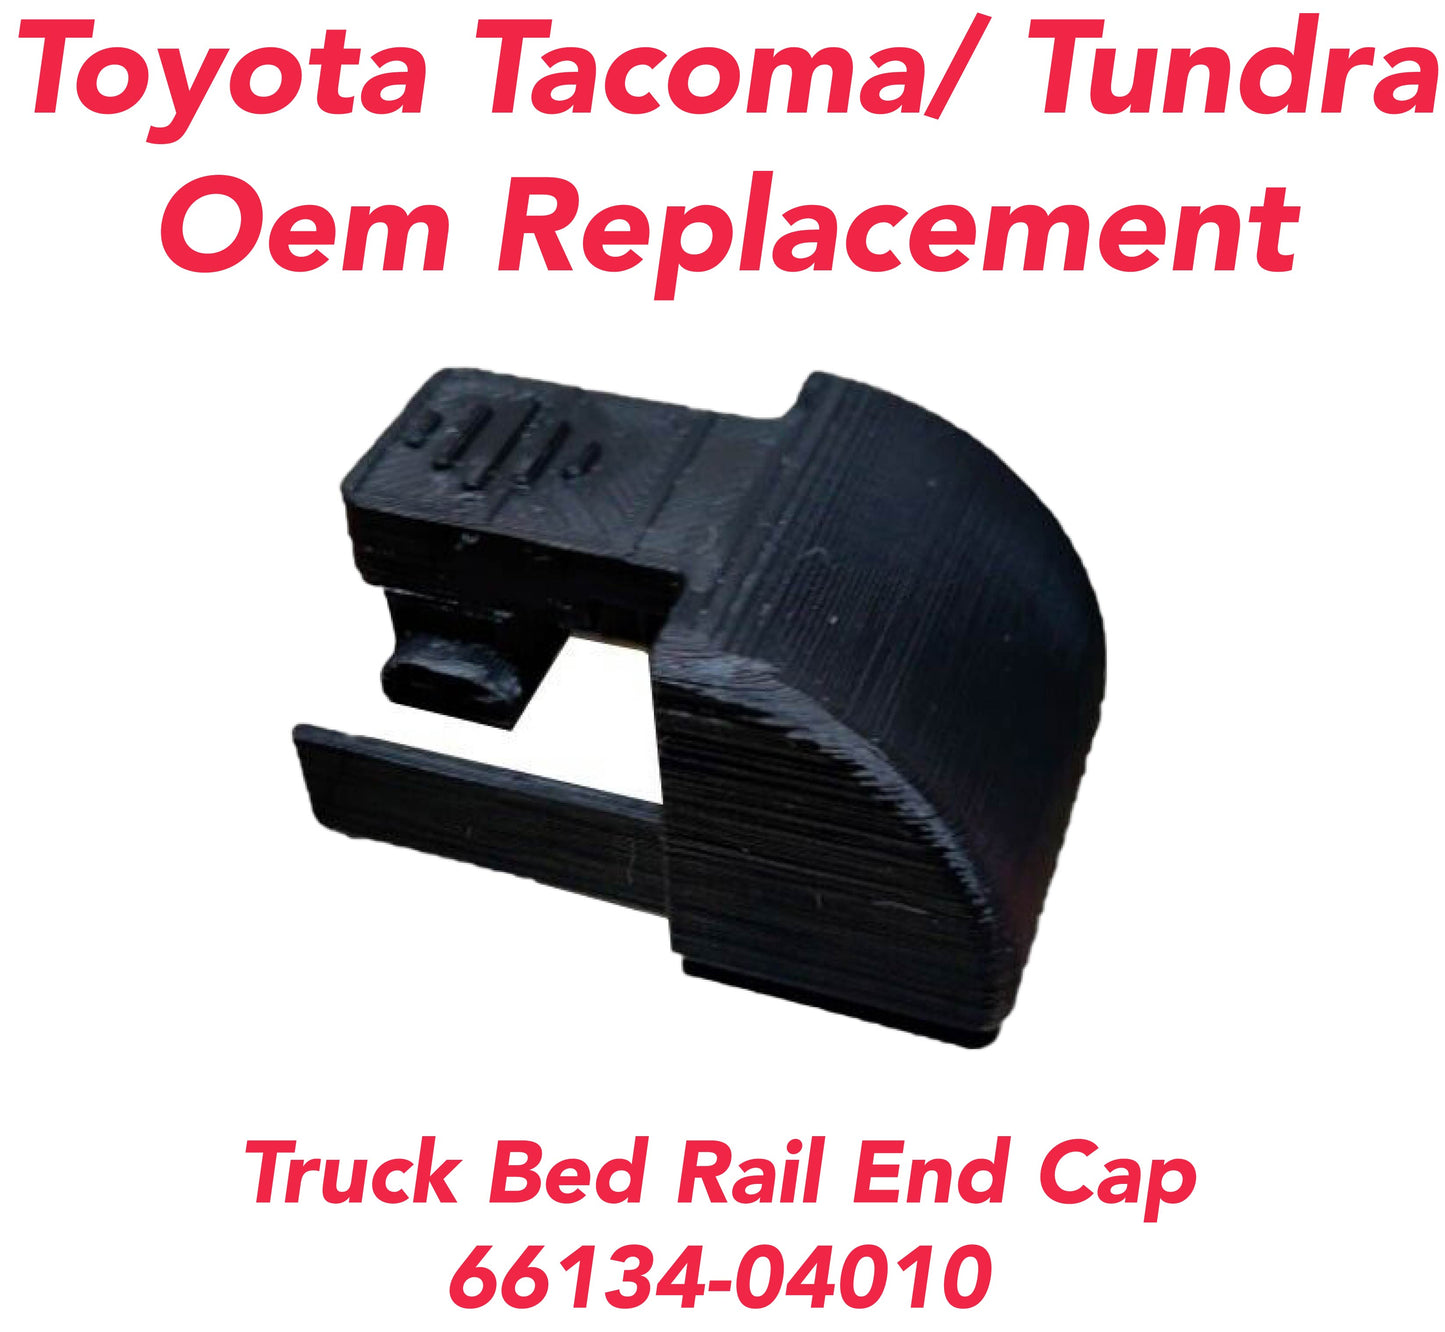 2 Pack Replacement Toyota Tacoma/Tundra Bed Rail End Cap Model: 66134-04010